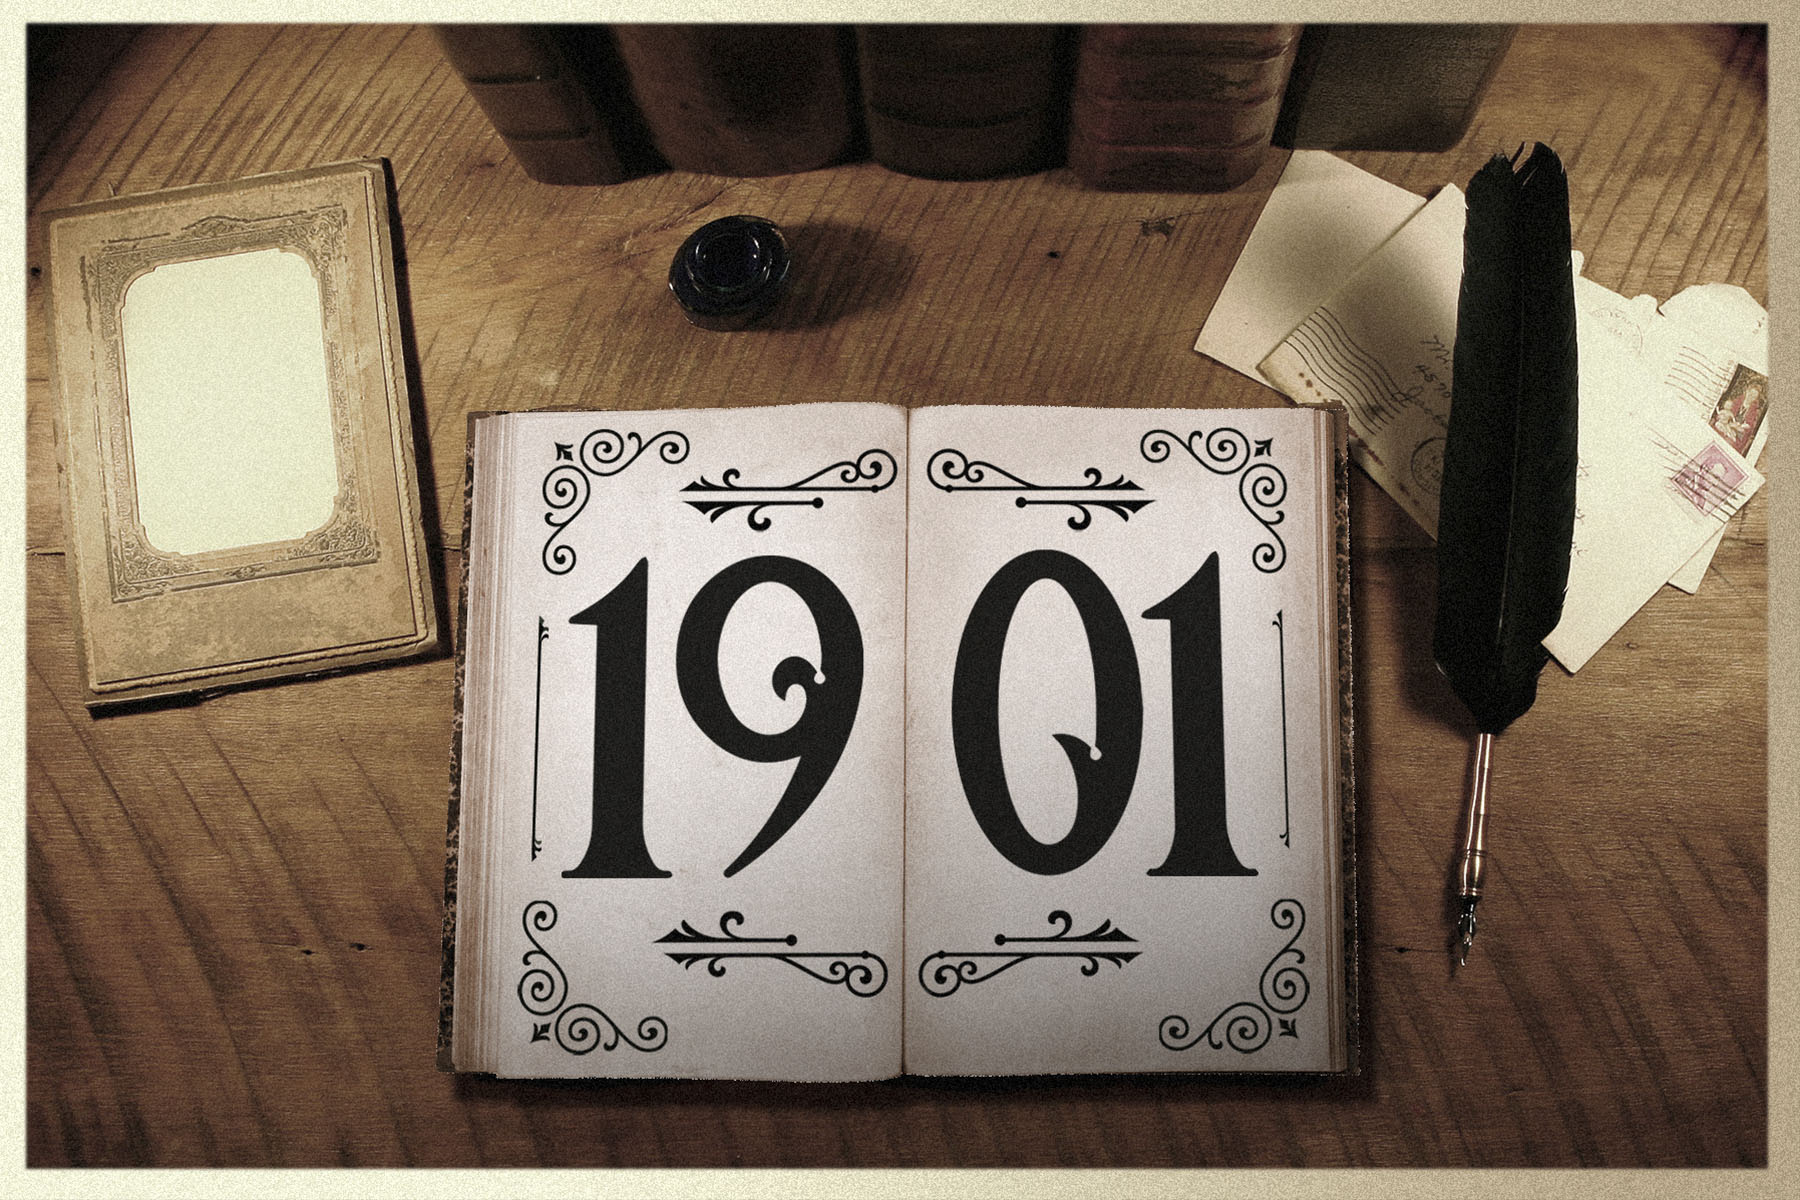 An illustration of a top-down view of a book with the numbers 1901 written on the pages